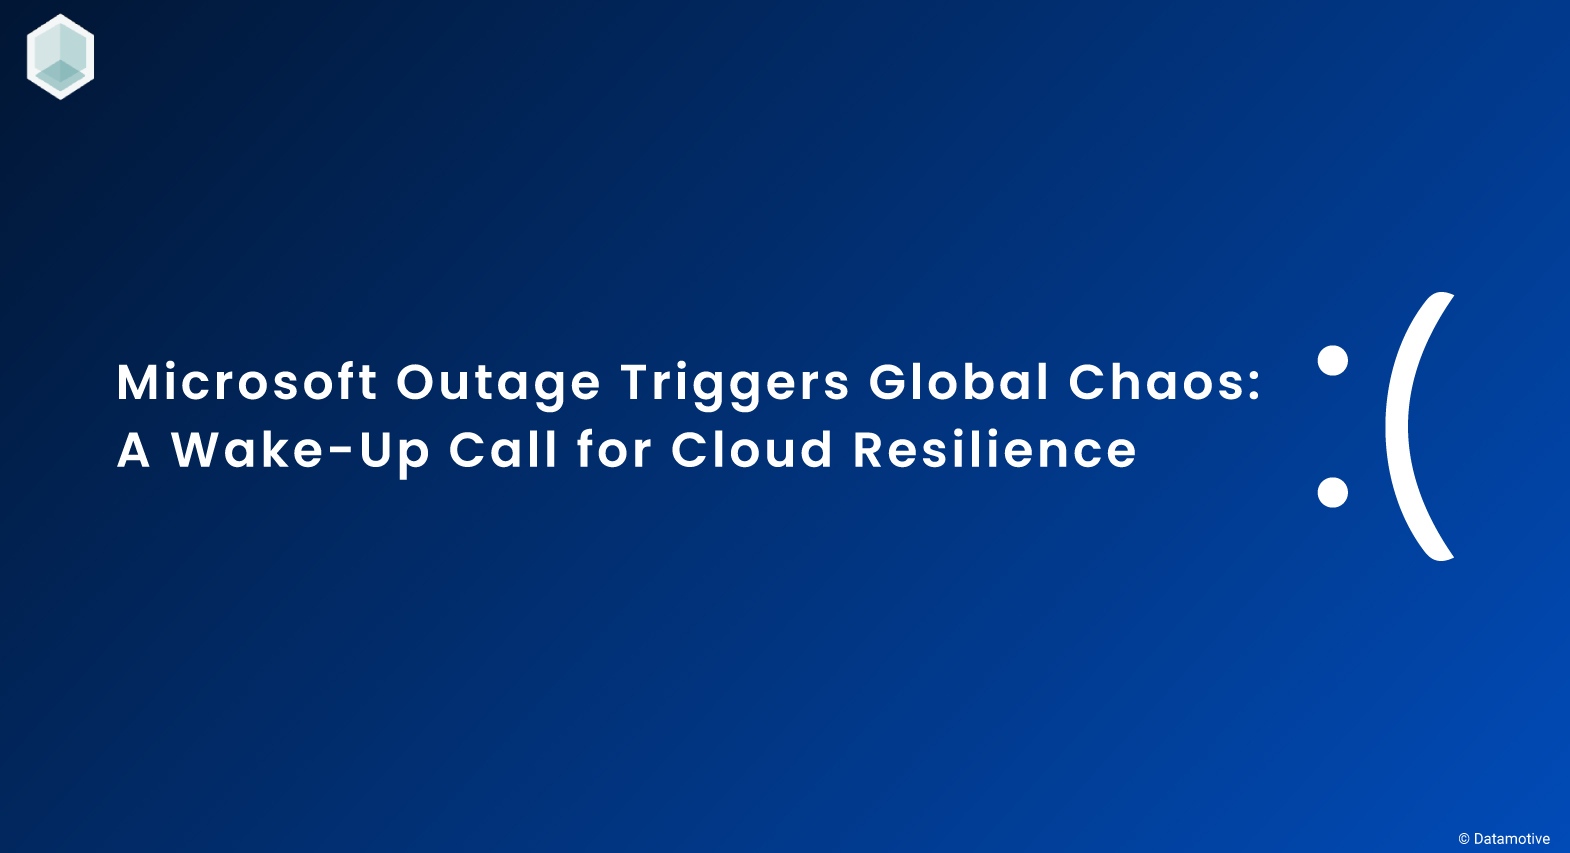 Microsoft Outage Triggers Global Chaos: A Wake-Up Call for Cloud Resilience